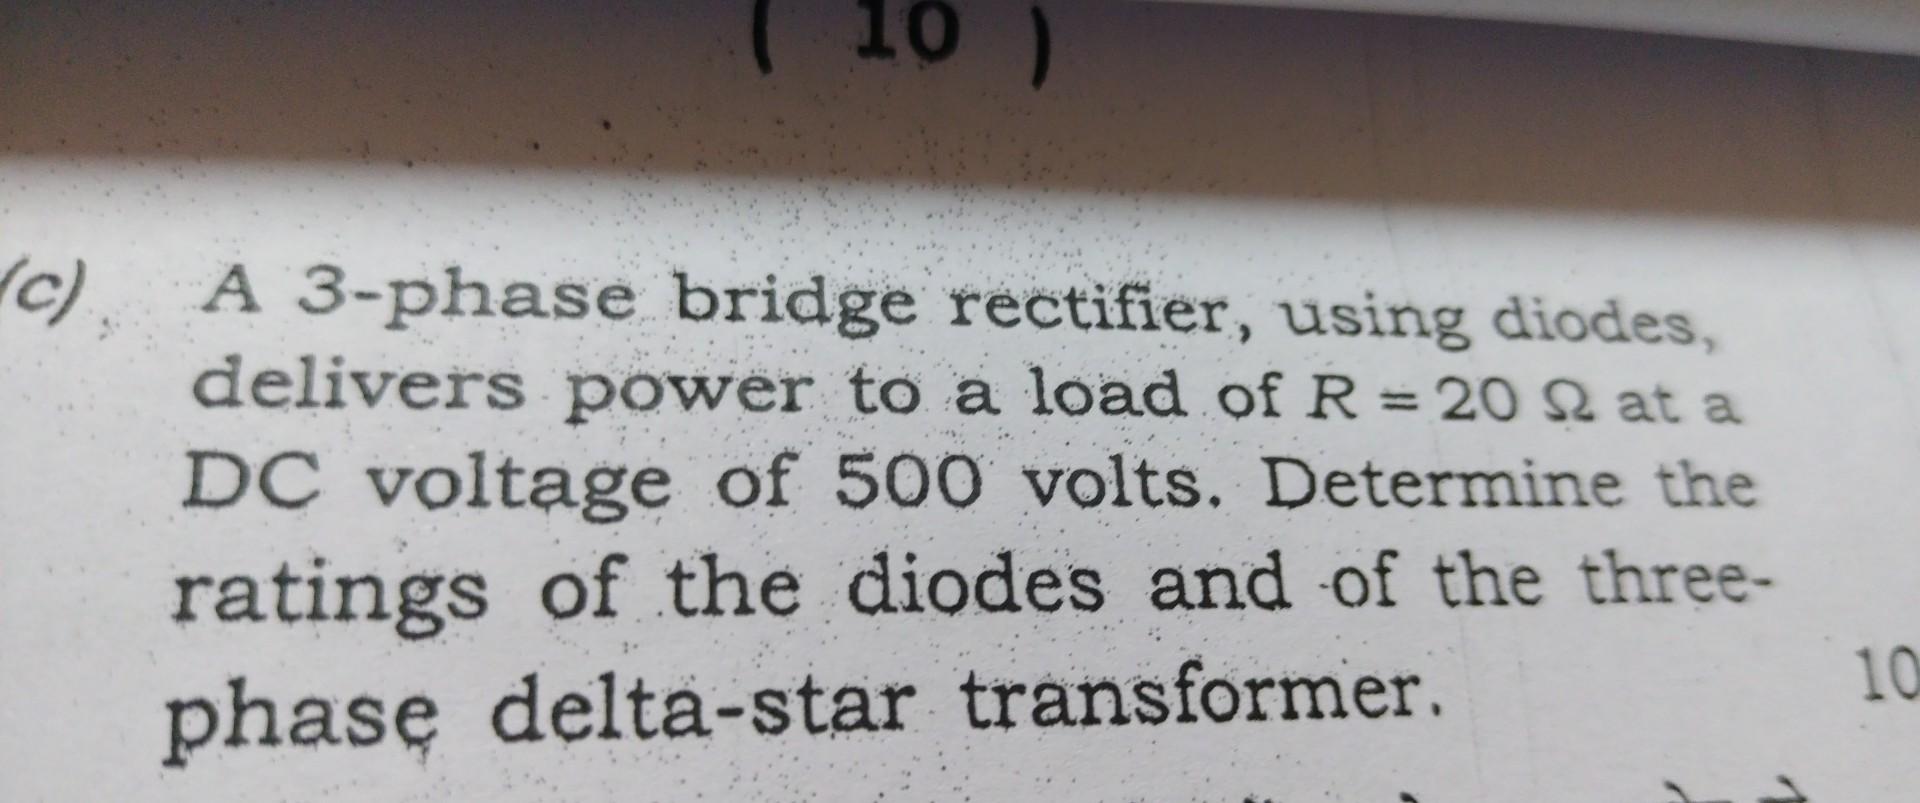 A 3-phase bridge rectifier, using diodes, delivers power to a load of \( R=20 \Omega \) at a DC voltage of 500 volts. Determi